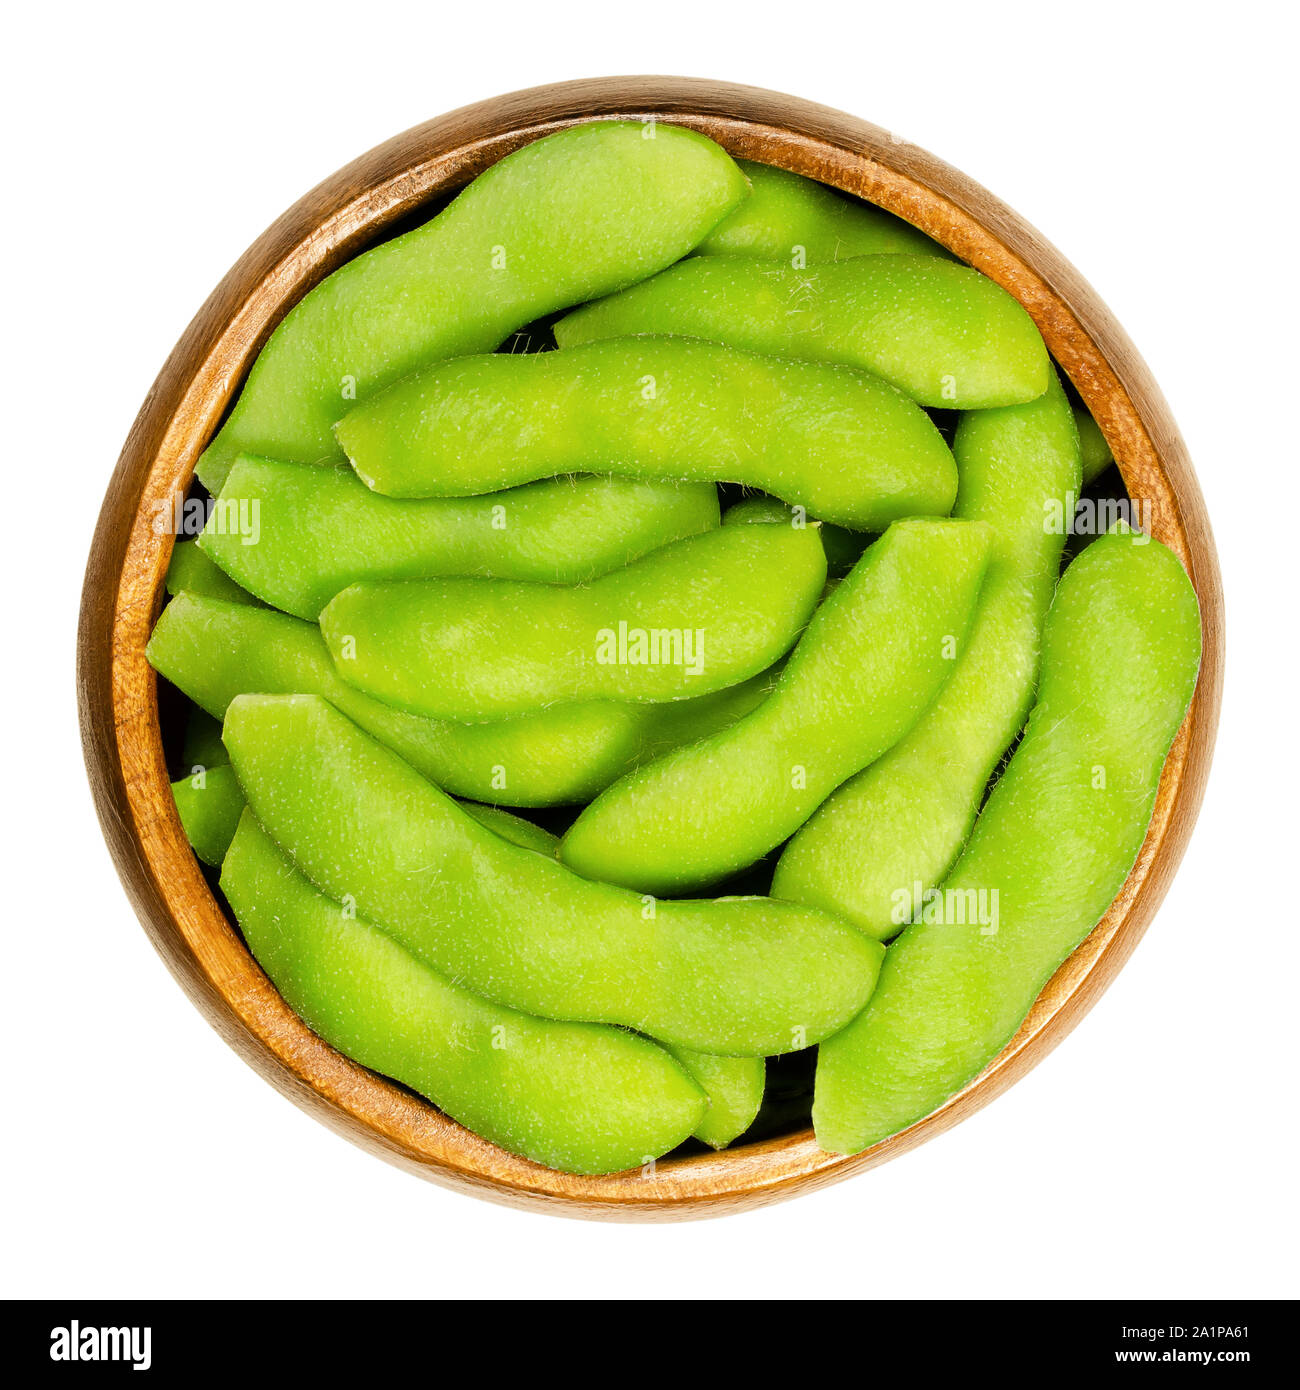 Edamame, green soybeans in the pod, in wooden bowl. Unripe soya beans, also Maodou. Glycine max, a legume, edible after cooking. Protein source. Stock Photo